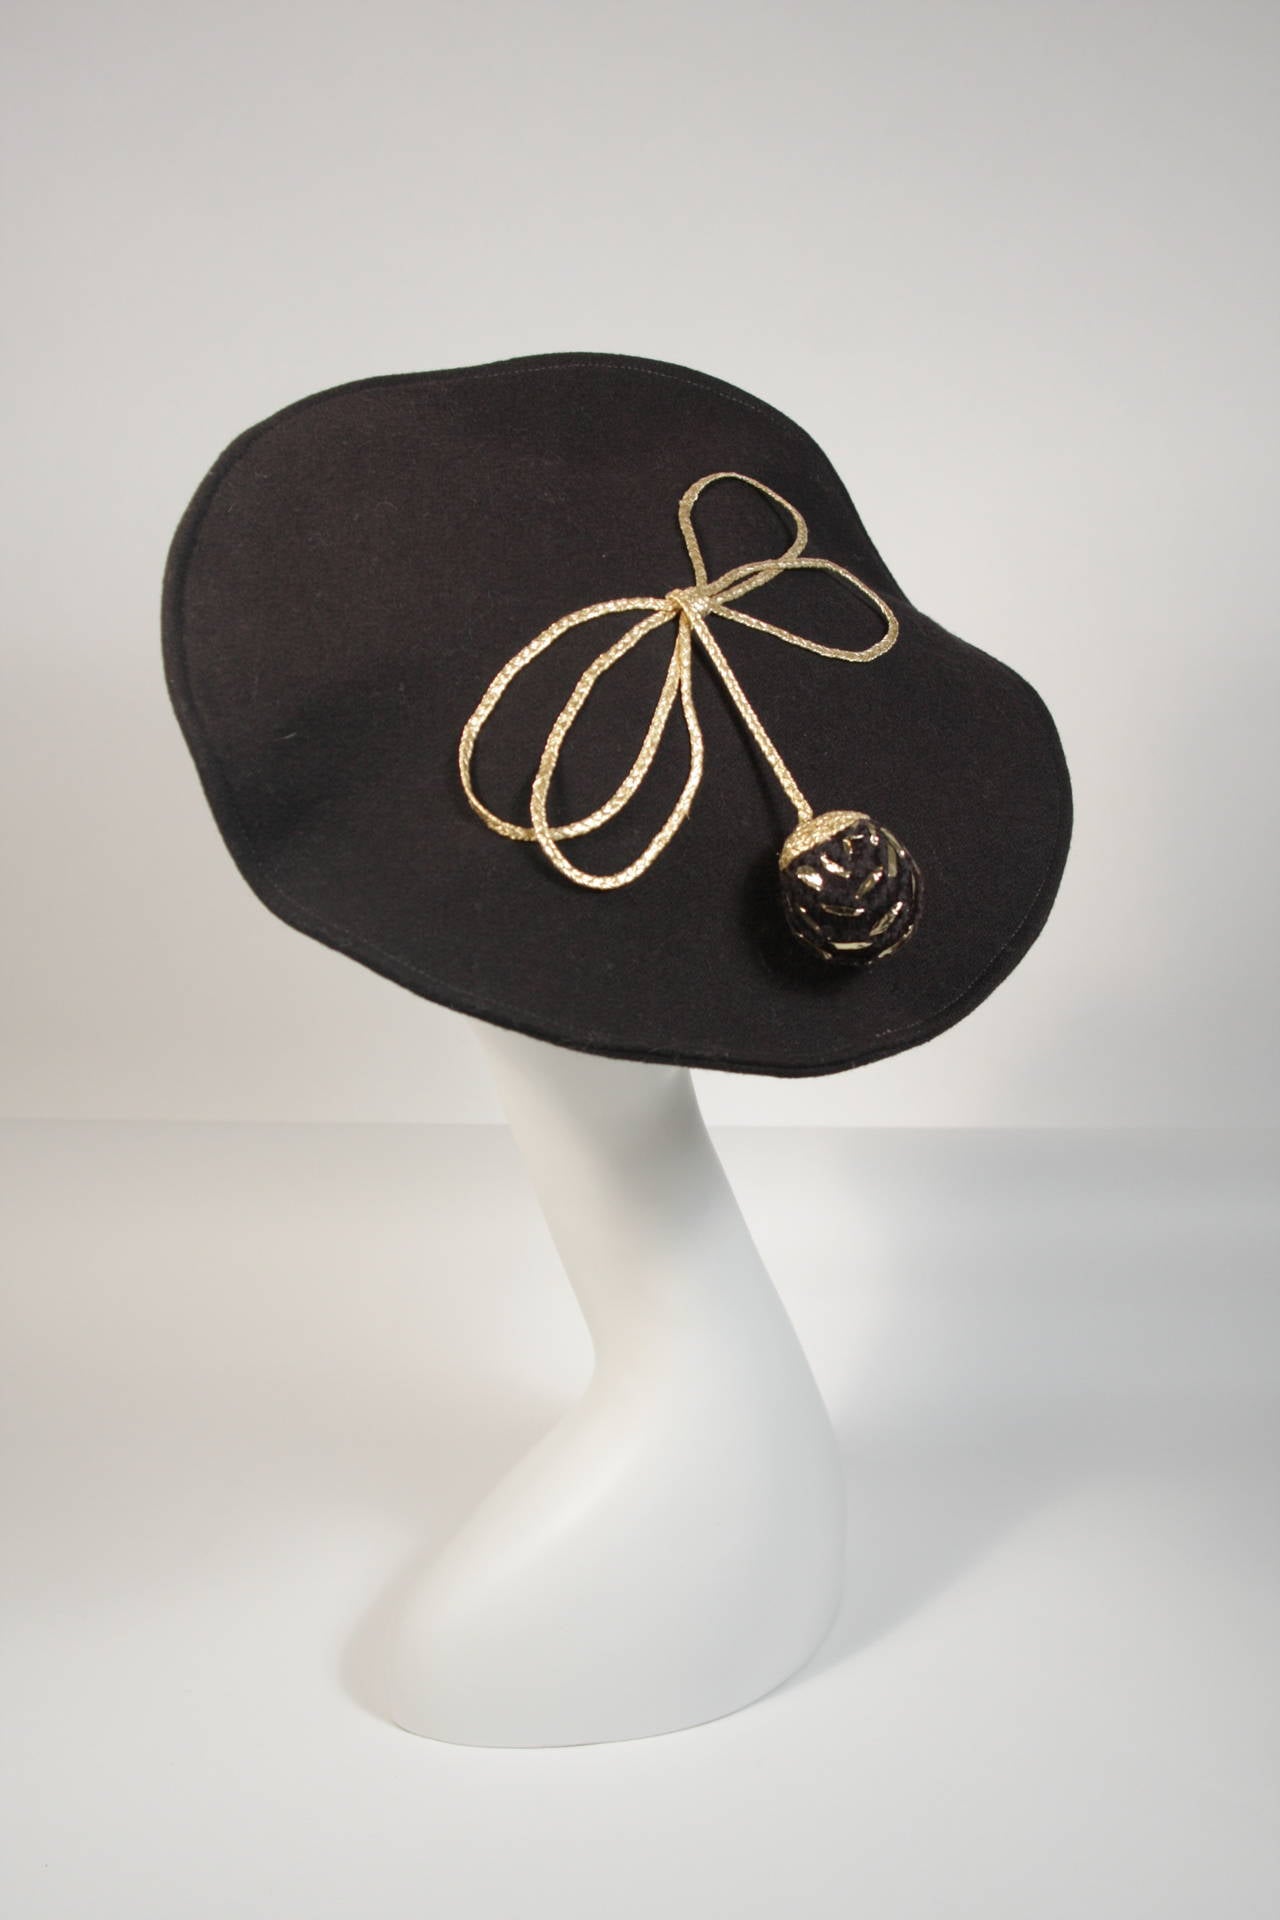 This Yves Saint Laurent Rive Gauche hat is composed of a black wool. The hat features a knit ball with metallic accents set in a bow. In excellent vintage condition. Made in France.

This YSL hat is from an extensive collection I acquired from the